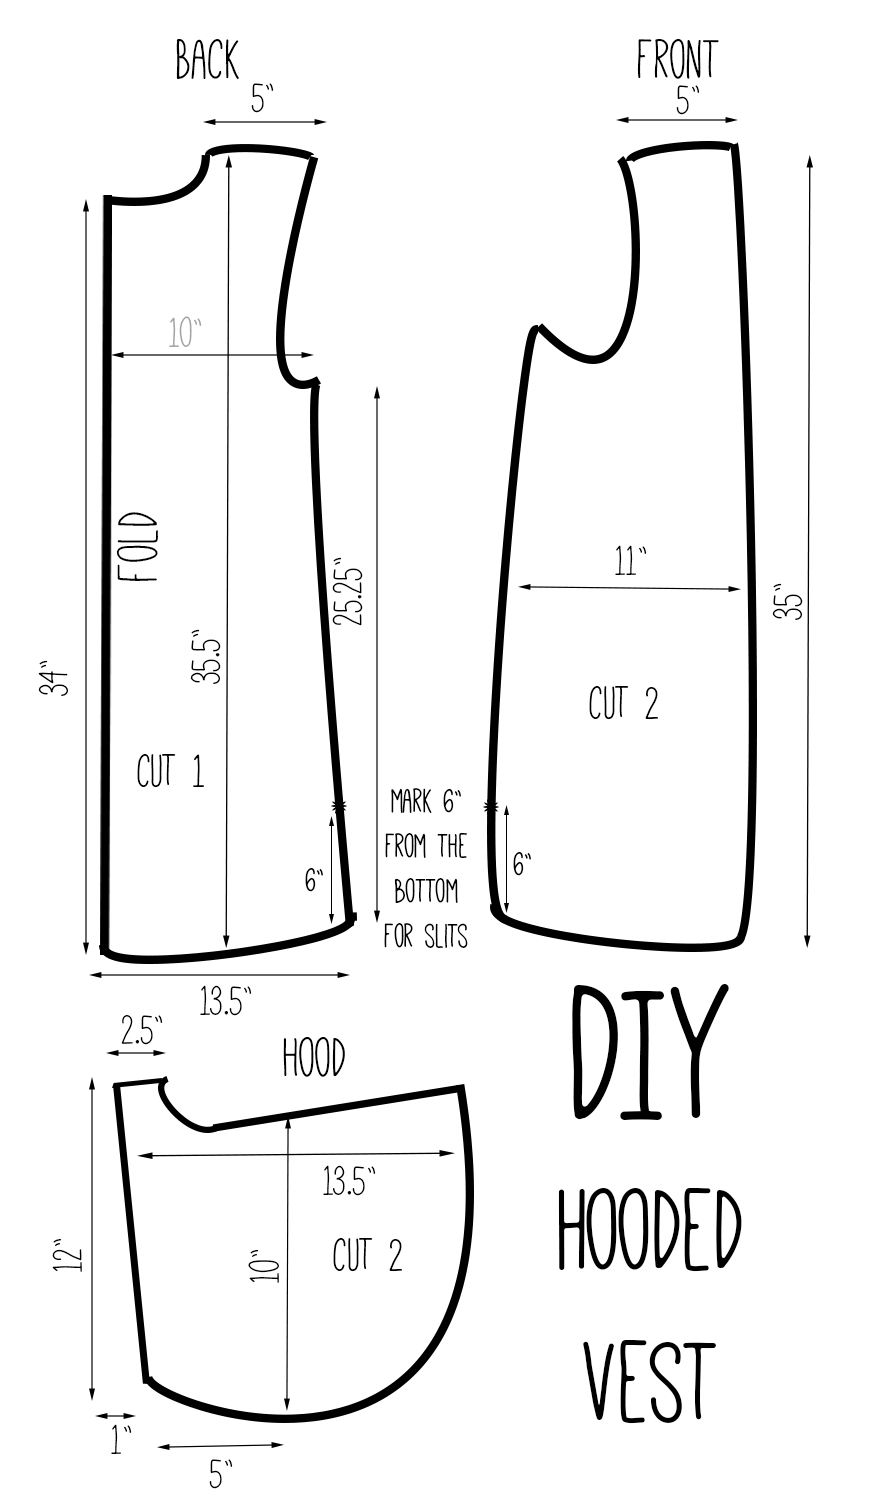 Vest Pattern Sewing Diy Hooded Vest Drafting Pinterest Sewing Sewing Projects I